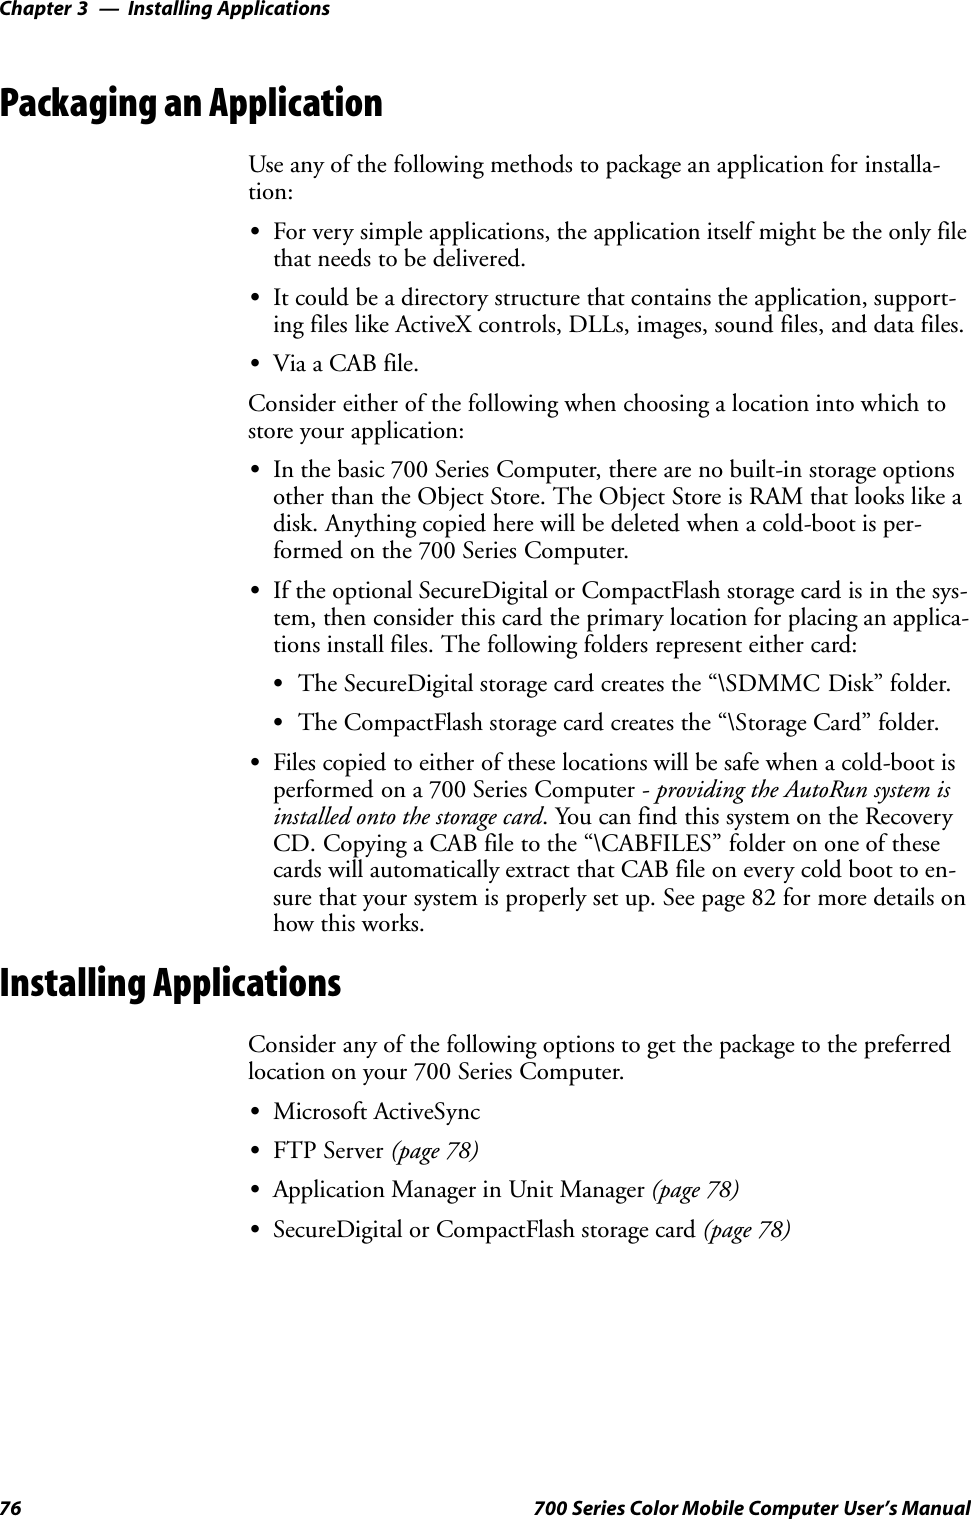 Installing ApplicationsChapter —376 700 Series Color Mobile Computer User’s ManualPackaging an ApplicationUse any of the following methods to package an application for installa-tion:SFor very simple applications, the application itself might be the only filethat needs to be delivered.SIt could be a directory structure that contains the application, support-ing files like ActiveX controls, DLLs, images, sound files, and data files.SVia a CAB file.Consider either of the following when choosing a location into which tostore your application:SIn the basic 700 Series Computer, there are no built-in storage optionsother than the Object Store. The Object Store is RAM that looks like adisk. Anything copied here will be deleted when a cold-boot is per-formed on the 700 Series Computer.SIf the optional SecureDigital or CompactFlash storage card is in the sys-tem, then consider this card the primary location for placing an applica-tions install files. The following folders represent either card:SThe SecureDigital storage card creates the “\SDMMC Disk” folder.SThe CompactFlash storage card creates the “\Storage Card” folder.SFiles copied to either of these locations will be safe when a cold-boot isperformed on a 700 Series Computer - providing the AutoRun system isinstalled onto the storage card. You can find this system on the RecoveryCD. Copying a CAB file to the “\CABFILES” folder on one of thesecards will automatically extract that CAB file on every cold boot to en-sure that your system is properly set up. See page 82 for more details onhow this works.Installing ApplicationsConsider any of the following options to get the package to the preferredlocation on your 700 Series Computer.SMicrosoft ActiveSyncSFTP Server (page 78)SApplication Manager in Unit Manager (page 78)SSecureDigital or CompactFlash storage card (page 78)